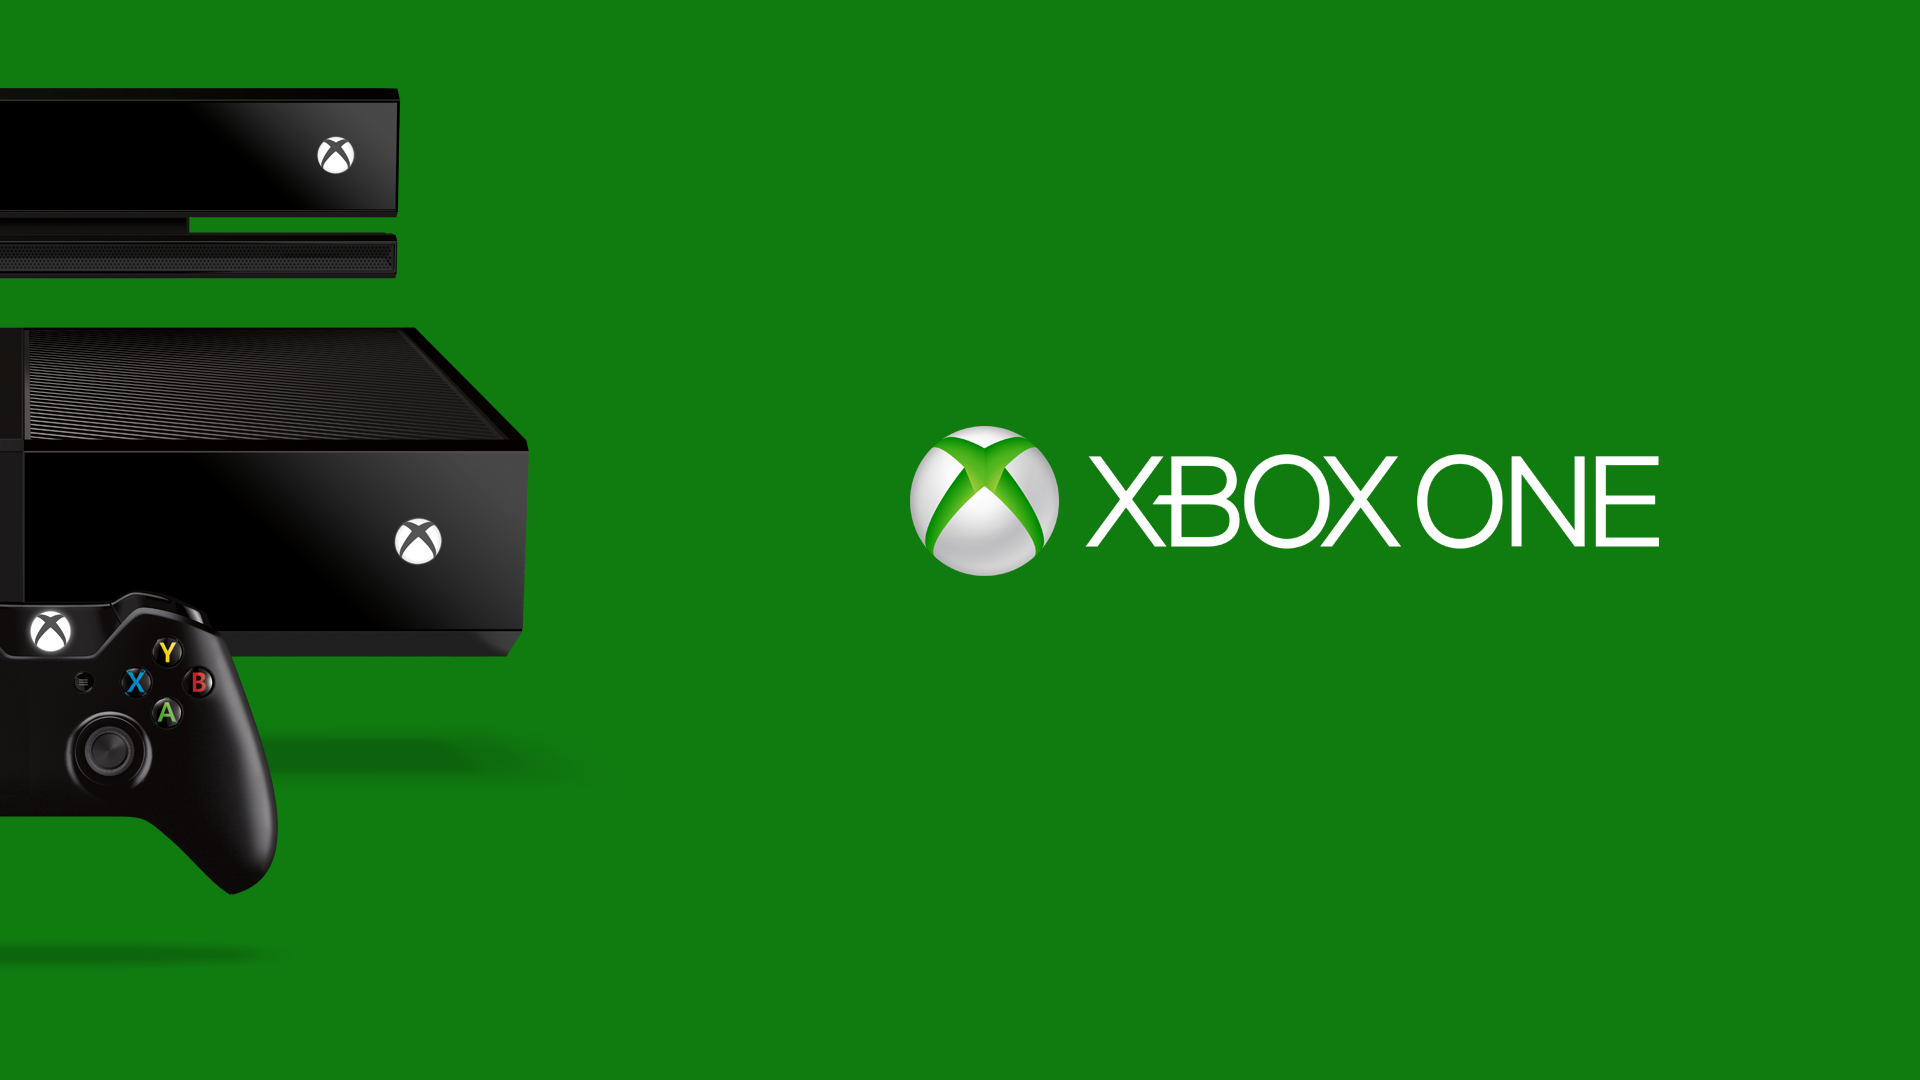 xbox one wallpaper 1920x1080,green,games,technology,font,electronic device